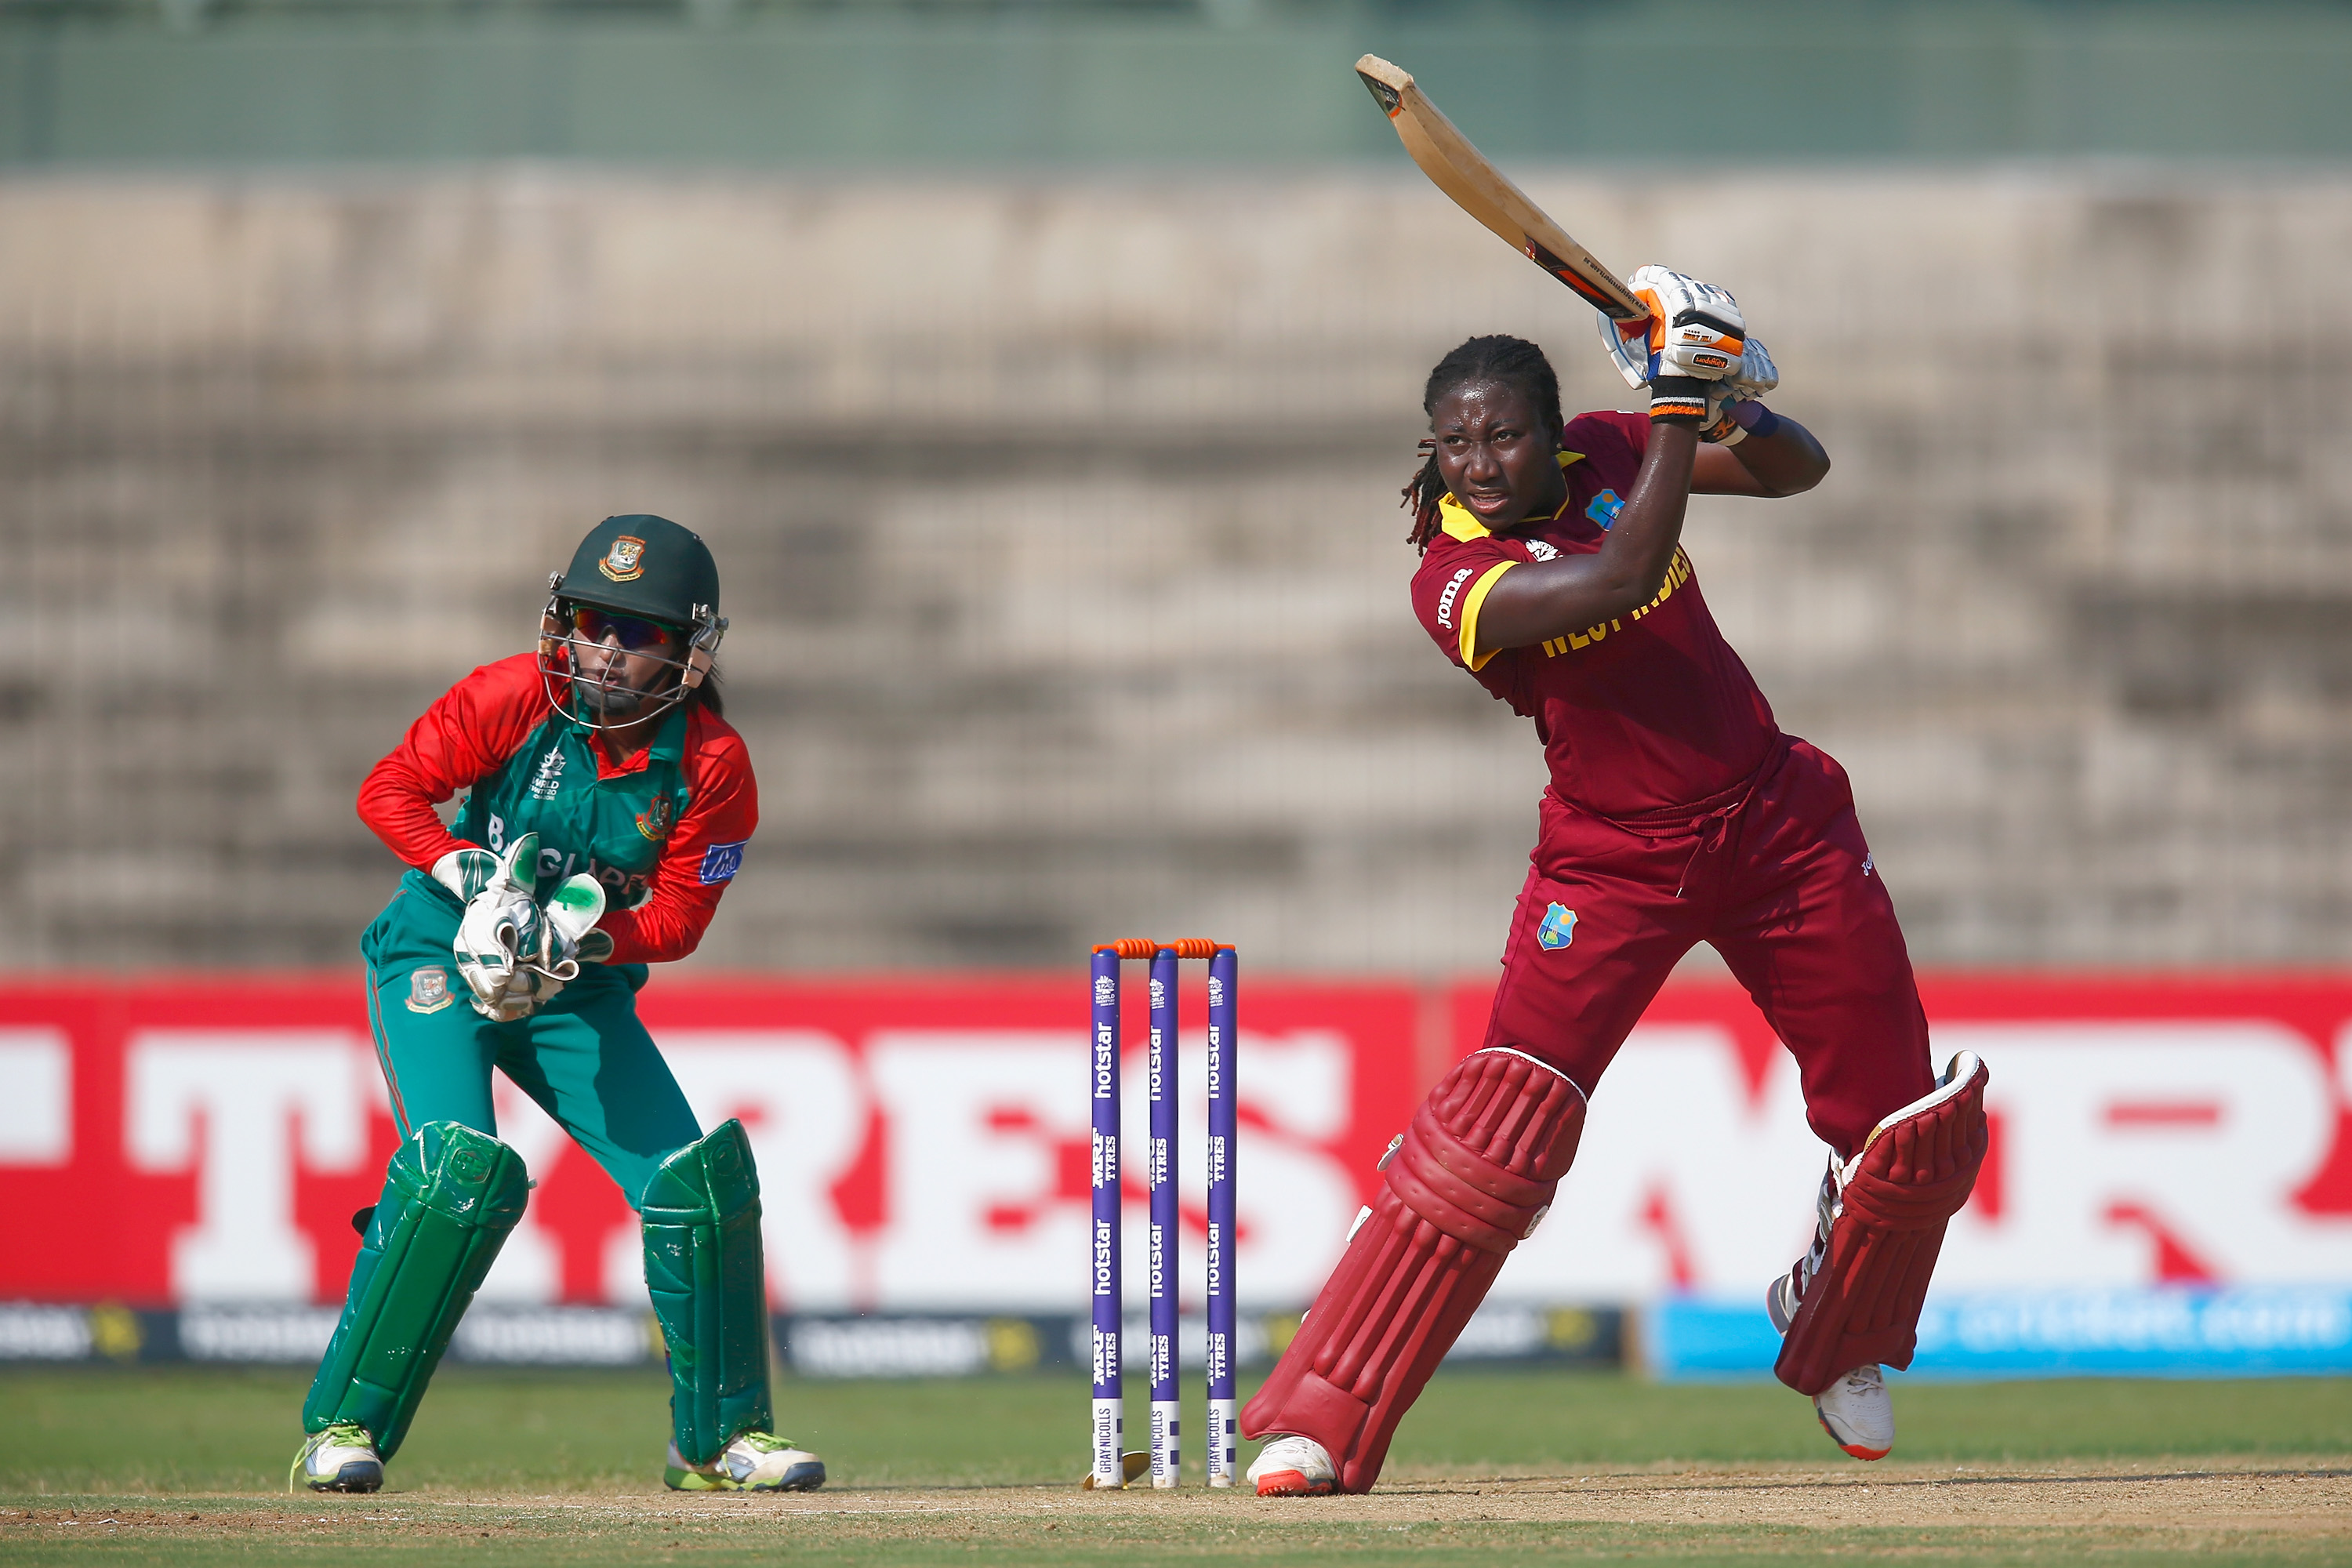 "CHENNAI, INDIA - MARCH 20: Stafanie Taylor, Captain of the West Indies in action with Nigar Sultana of Bangladesh during the Women's ICC World Twenty20 India 2016 Group B match between West Indies and Bangladesh at the Chidambaram Stadium on March 20, 2016 in Chennai, India. (Photo by Christopher Lee-IDI/IDI via Getty Images)"